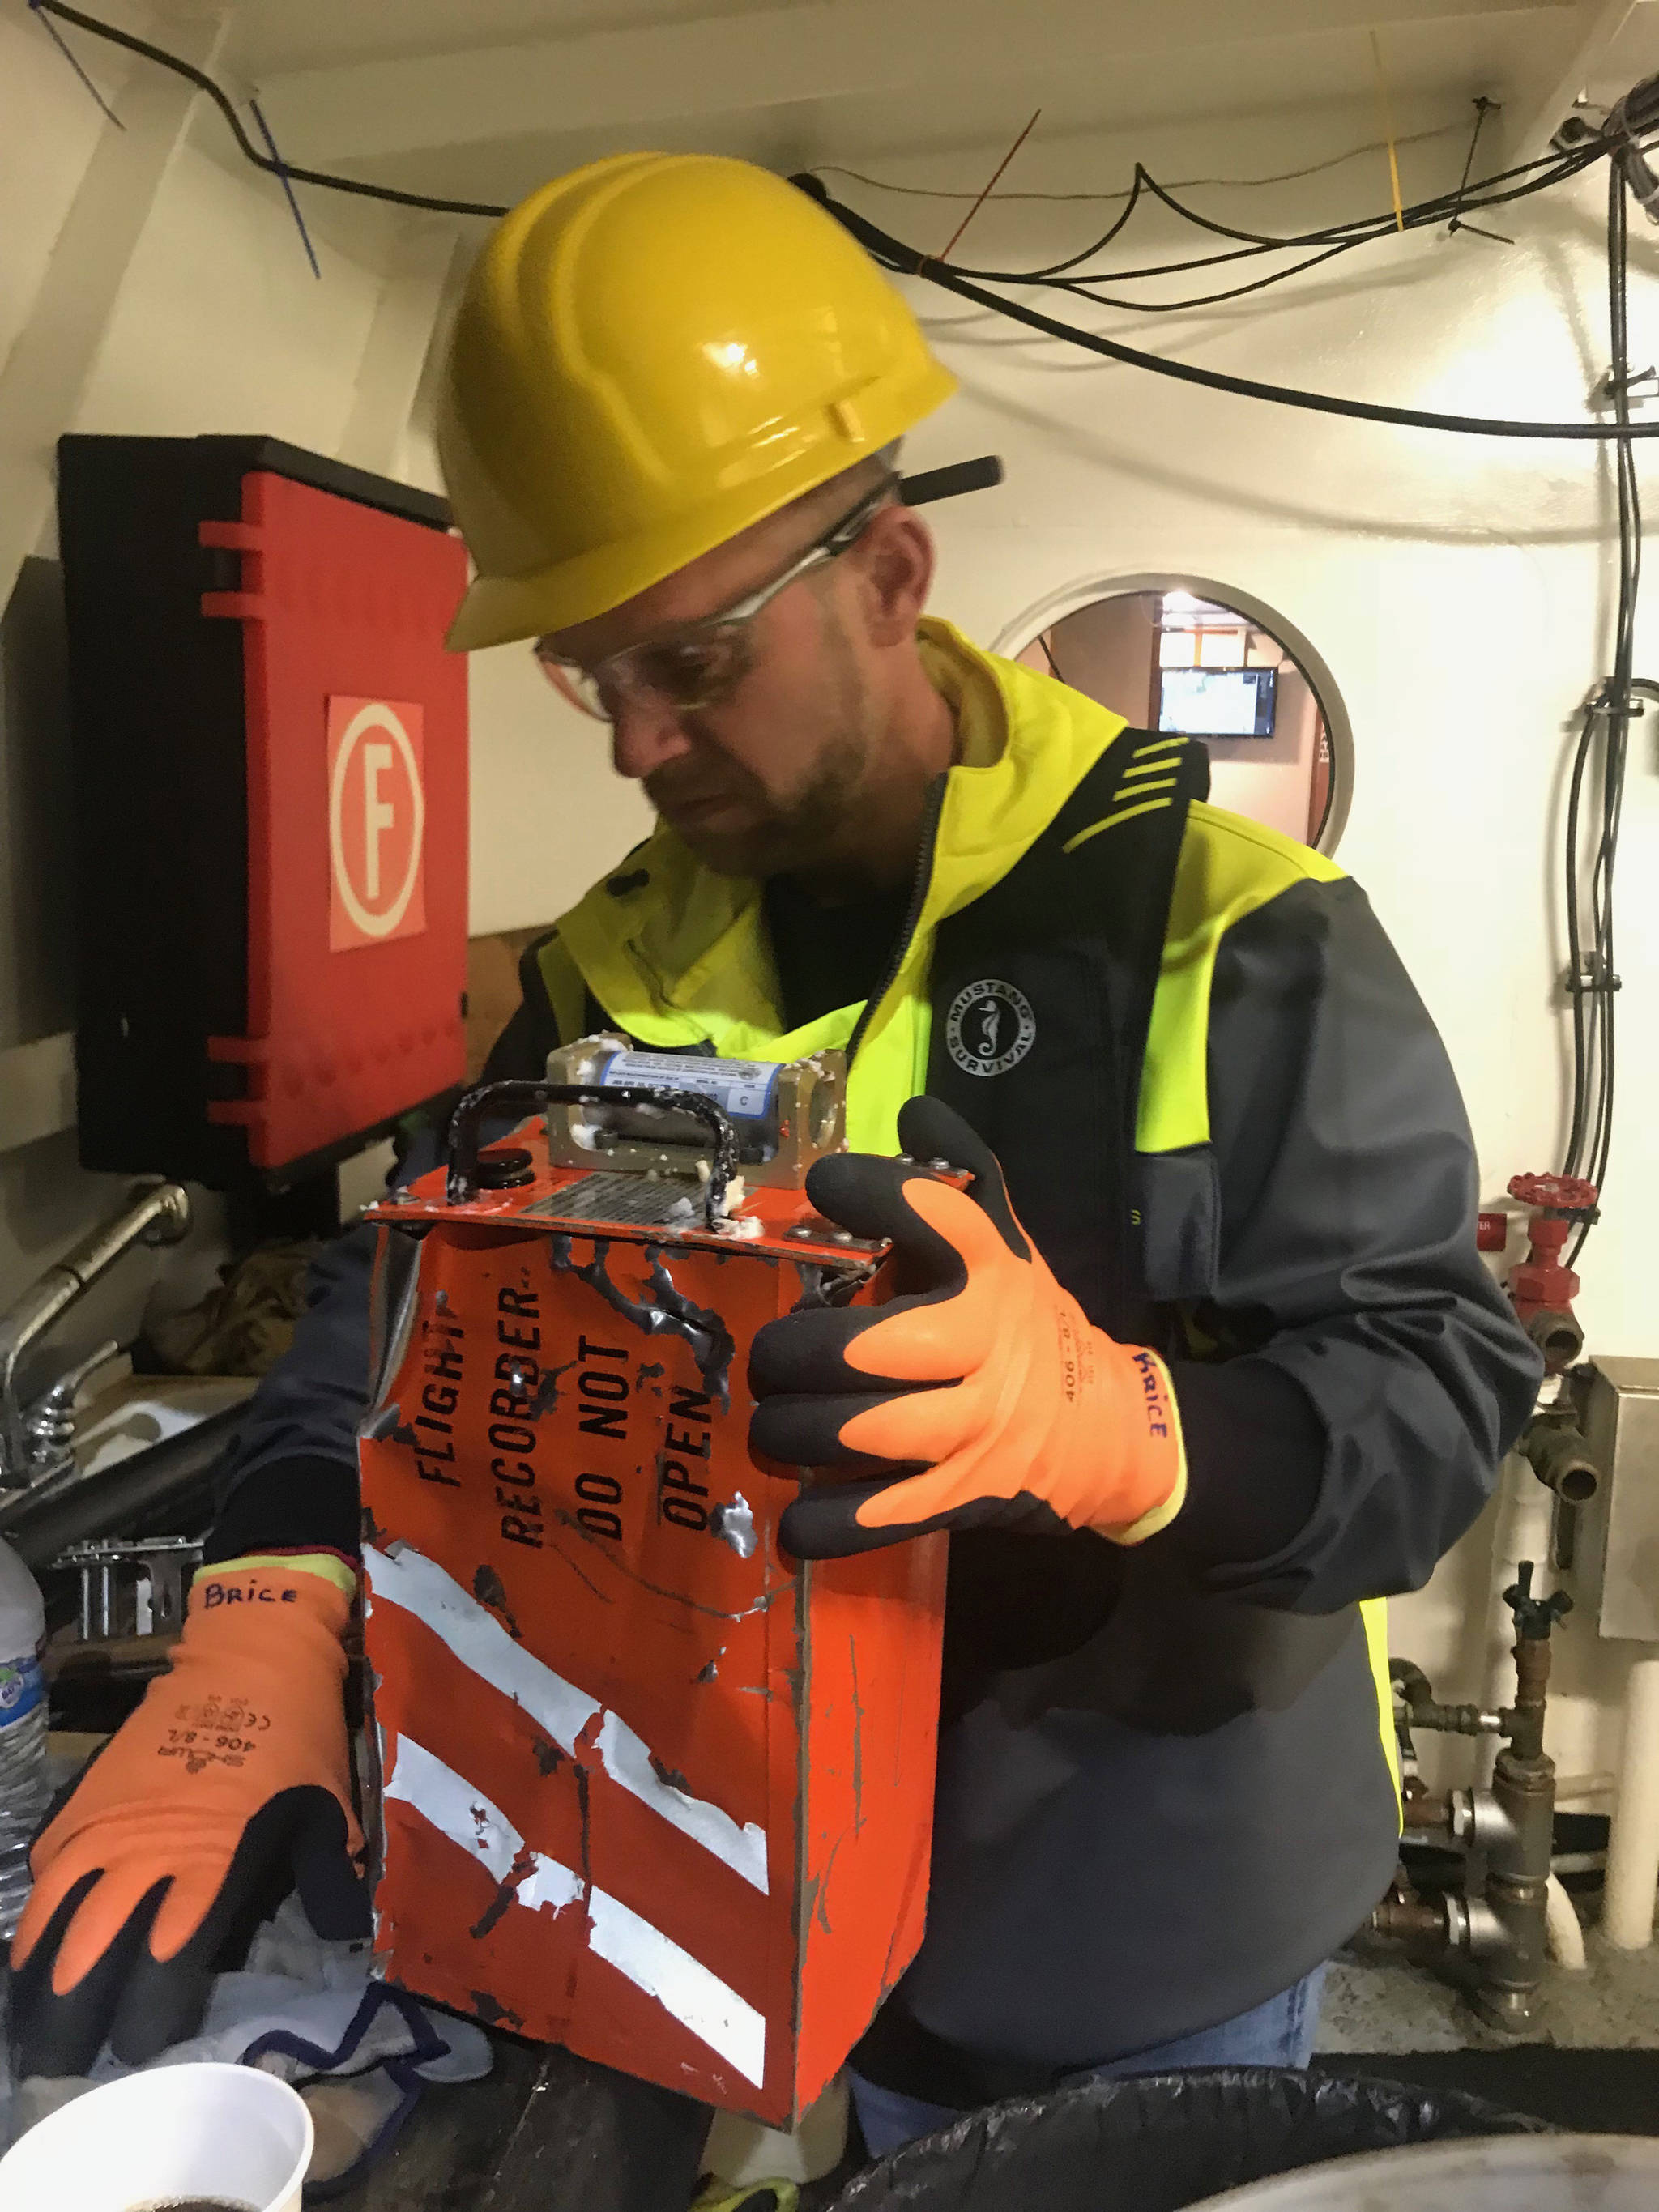 NTSB investigator Brice Banning holds a flight recorder from a Beechcraft B200 that was recovered from the ocean waters of Fredrick Sound near Kake. Alaska. The airplane crashed on Jan. 29, 2019 while on approach to the Kake Airport. The airplane was being operated by Guardian Flight as an air ambulance flight. (Courtesy Photo | National Transportation Safety Board)